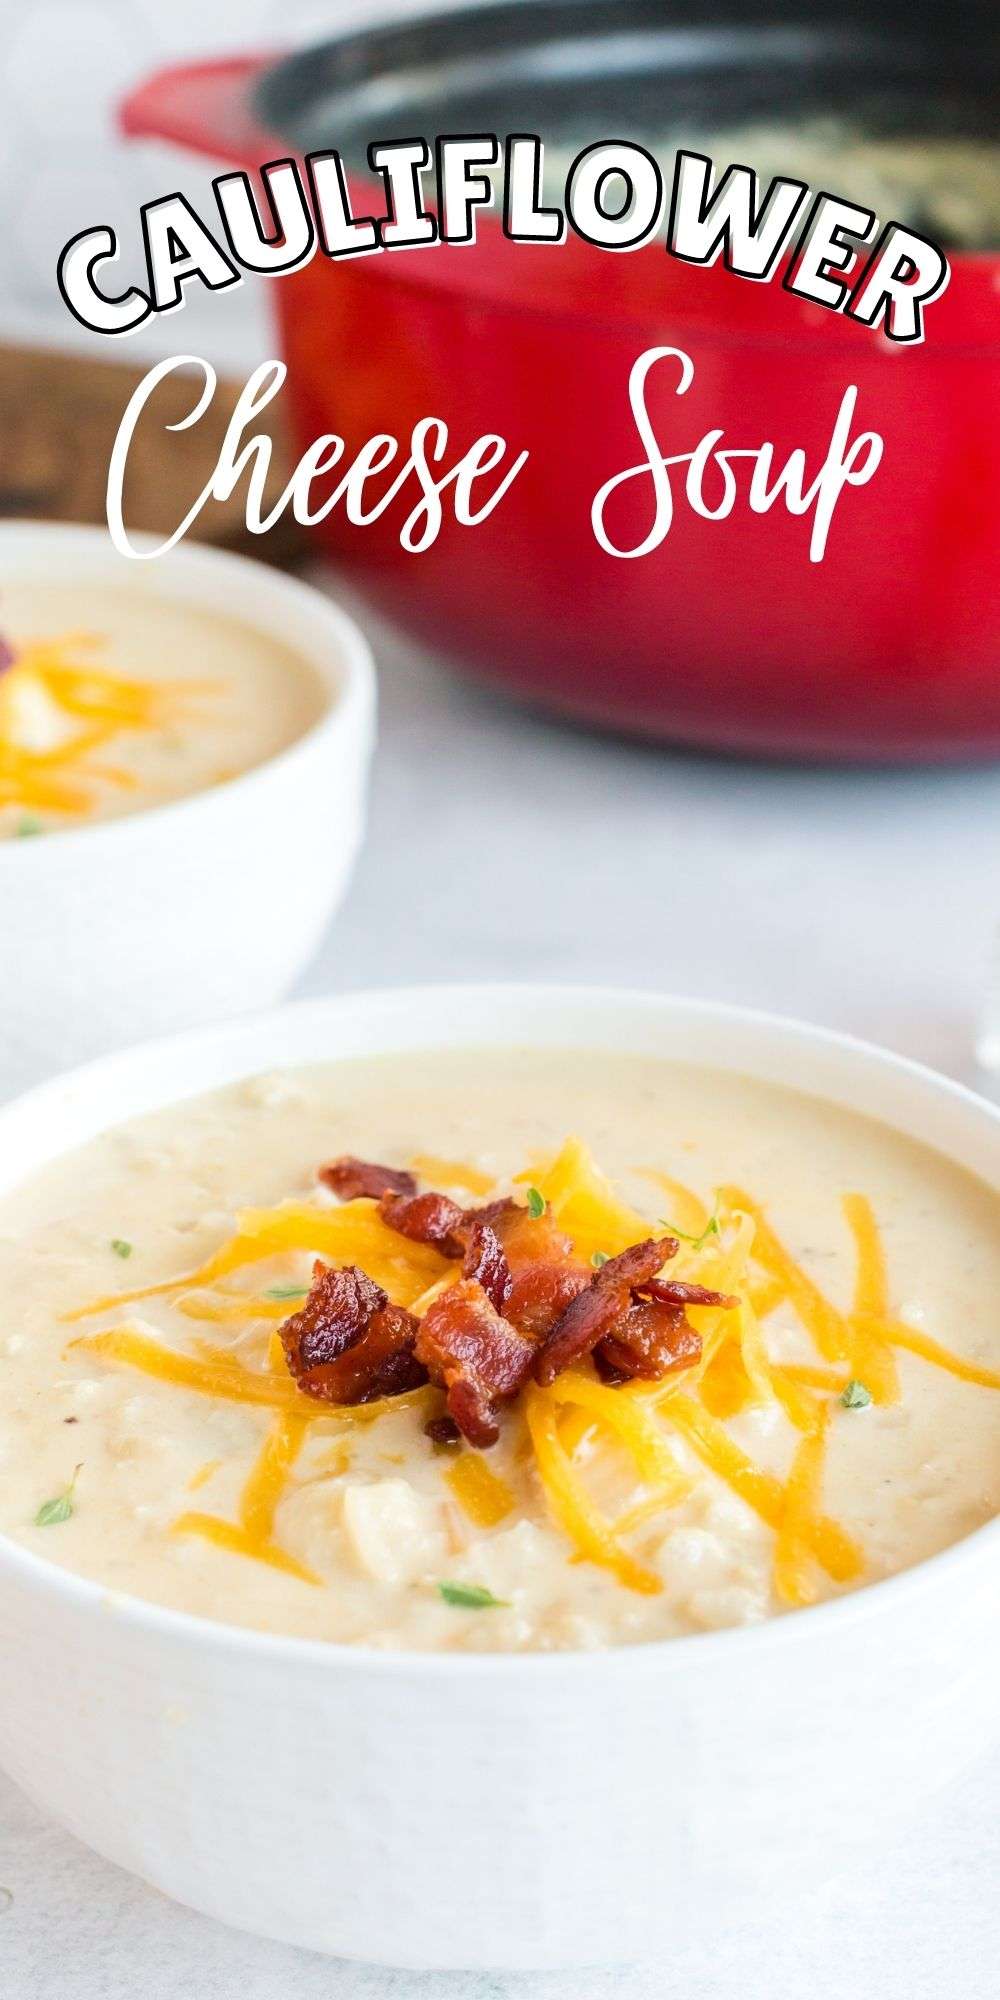 You can make Low Carb Cauliflower Cheese Soup even more delicious by serving it topped with bacon, shredded cheese, and fresh thyme. via @familyfresh